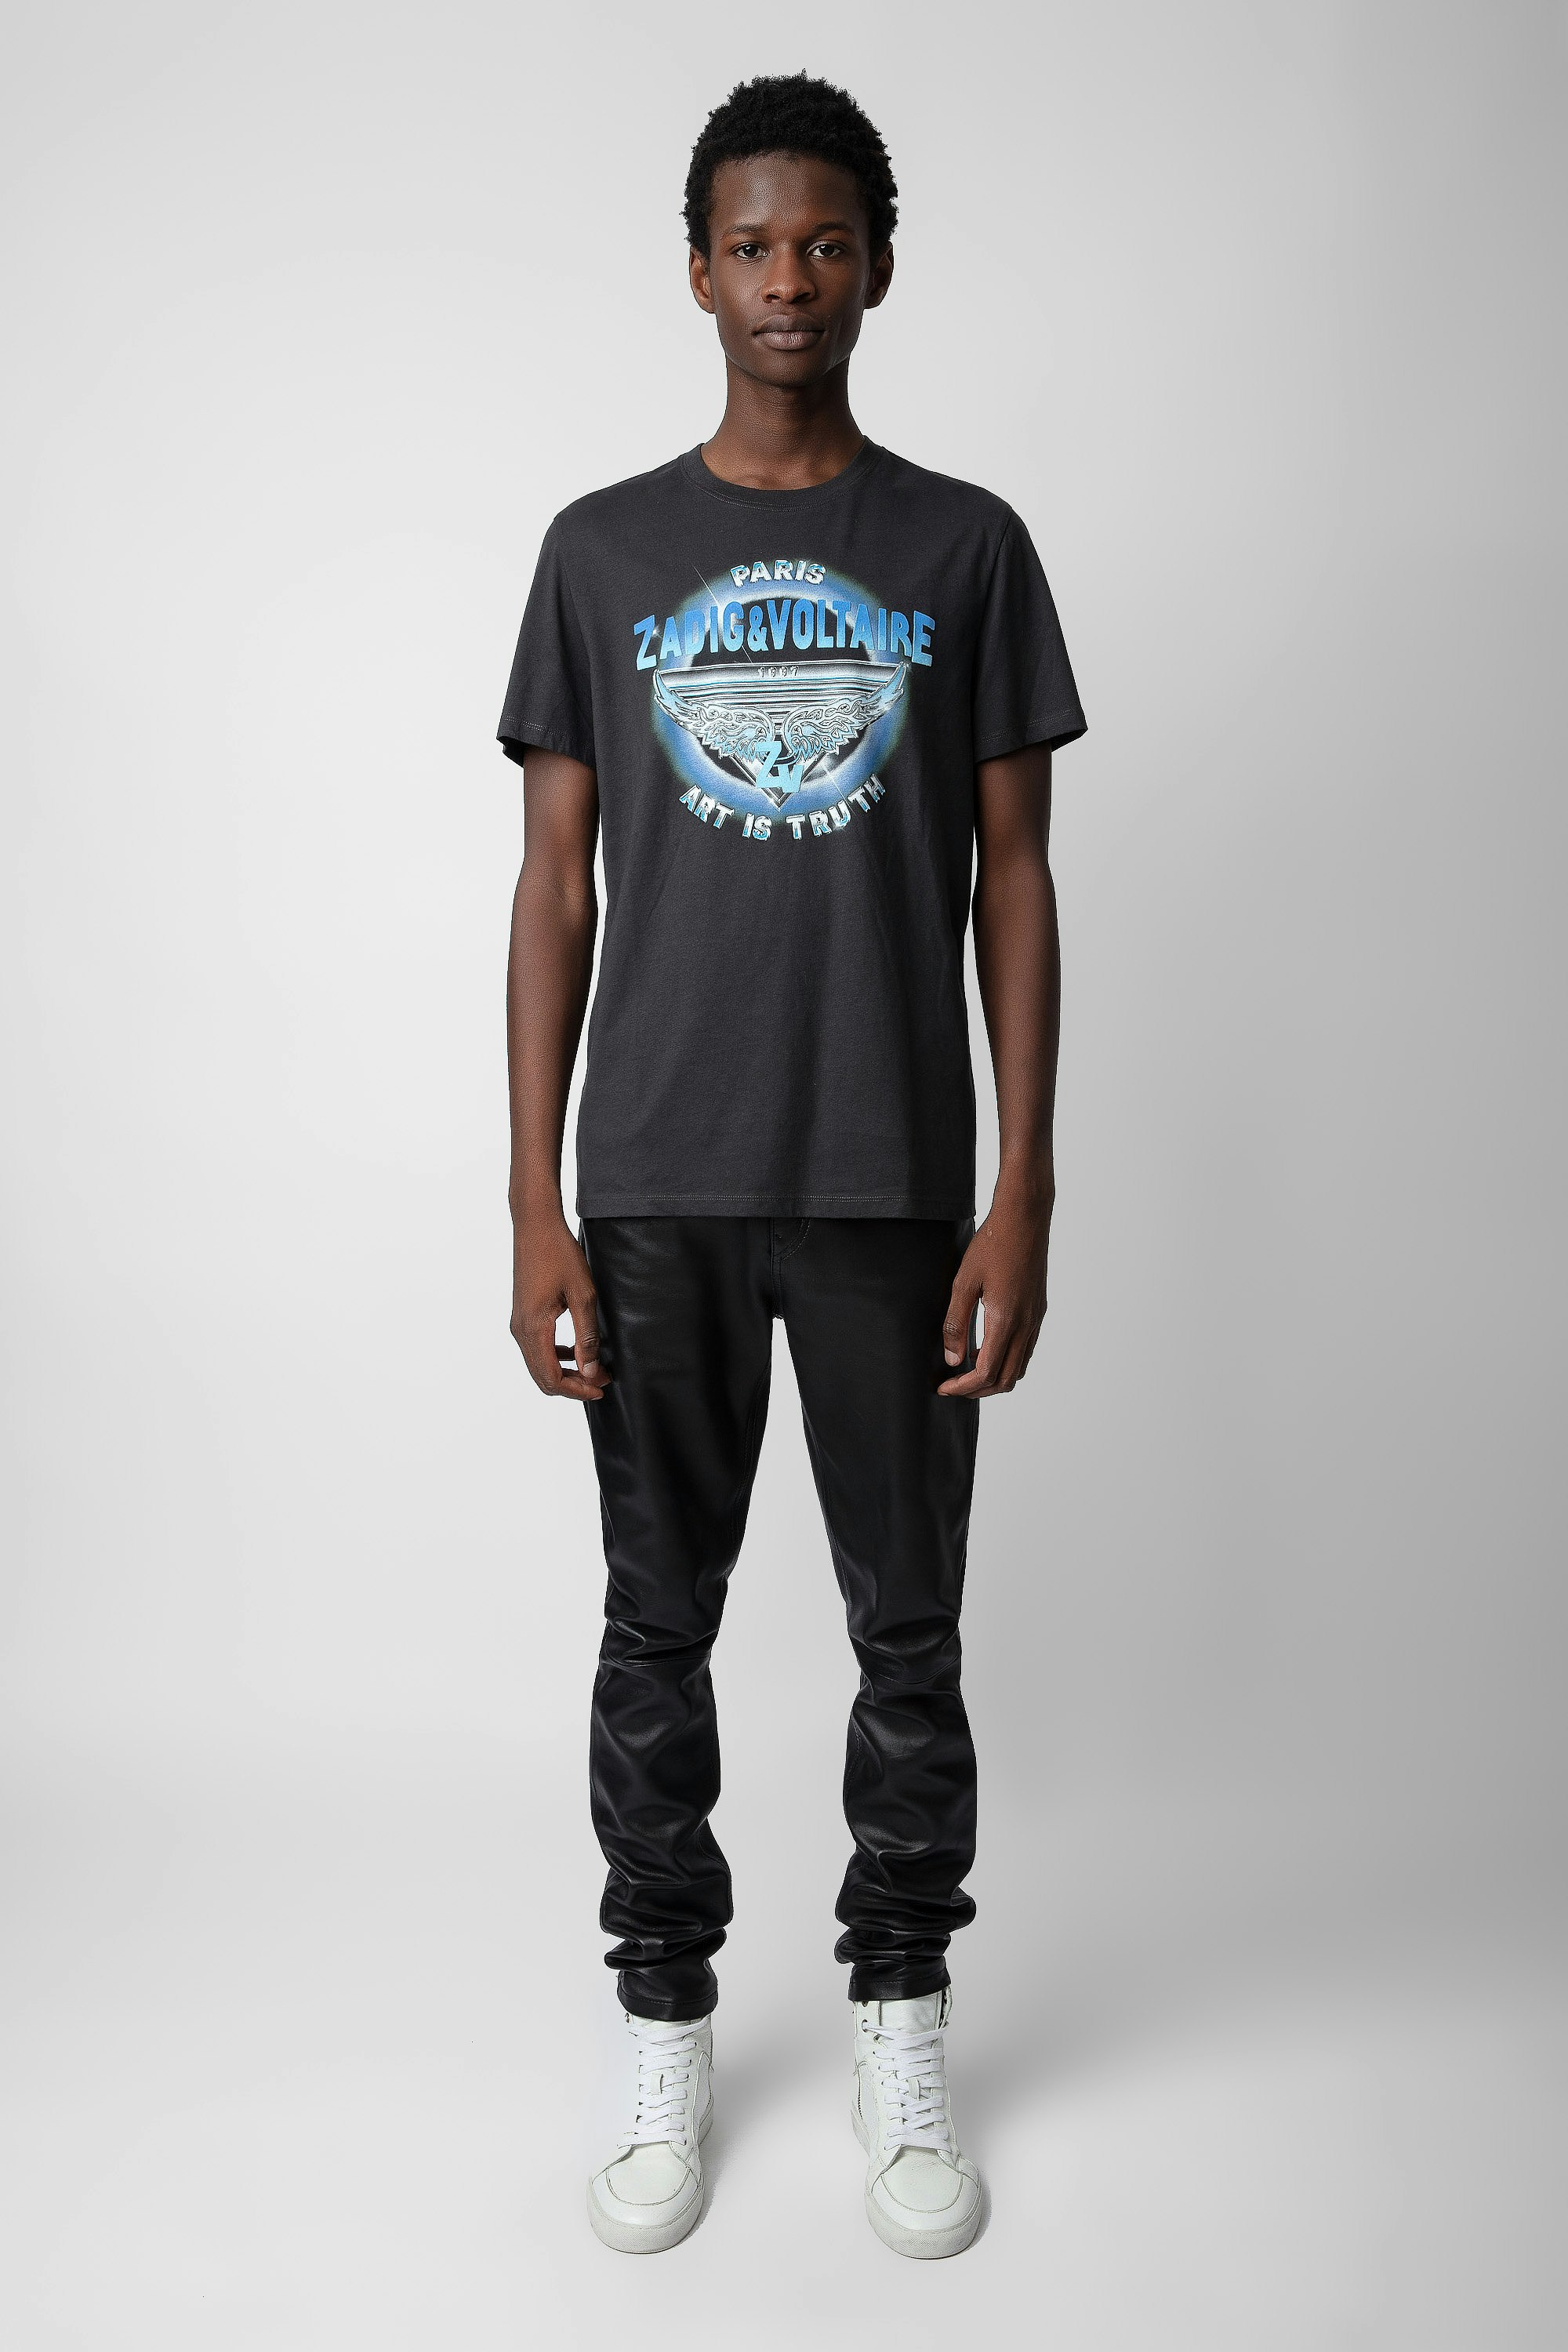 Tommy T-shirt - Men’s anthracite cotton T-shirt with Concert Halo print.